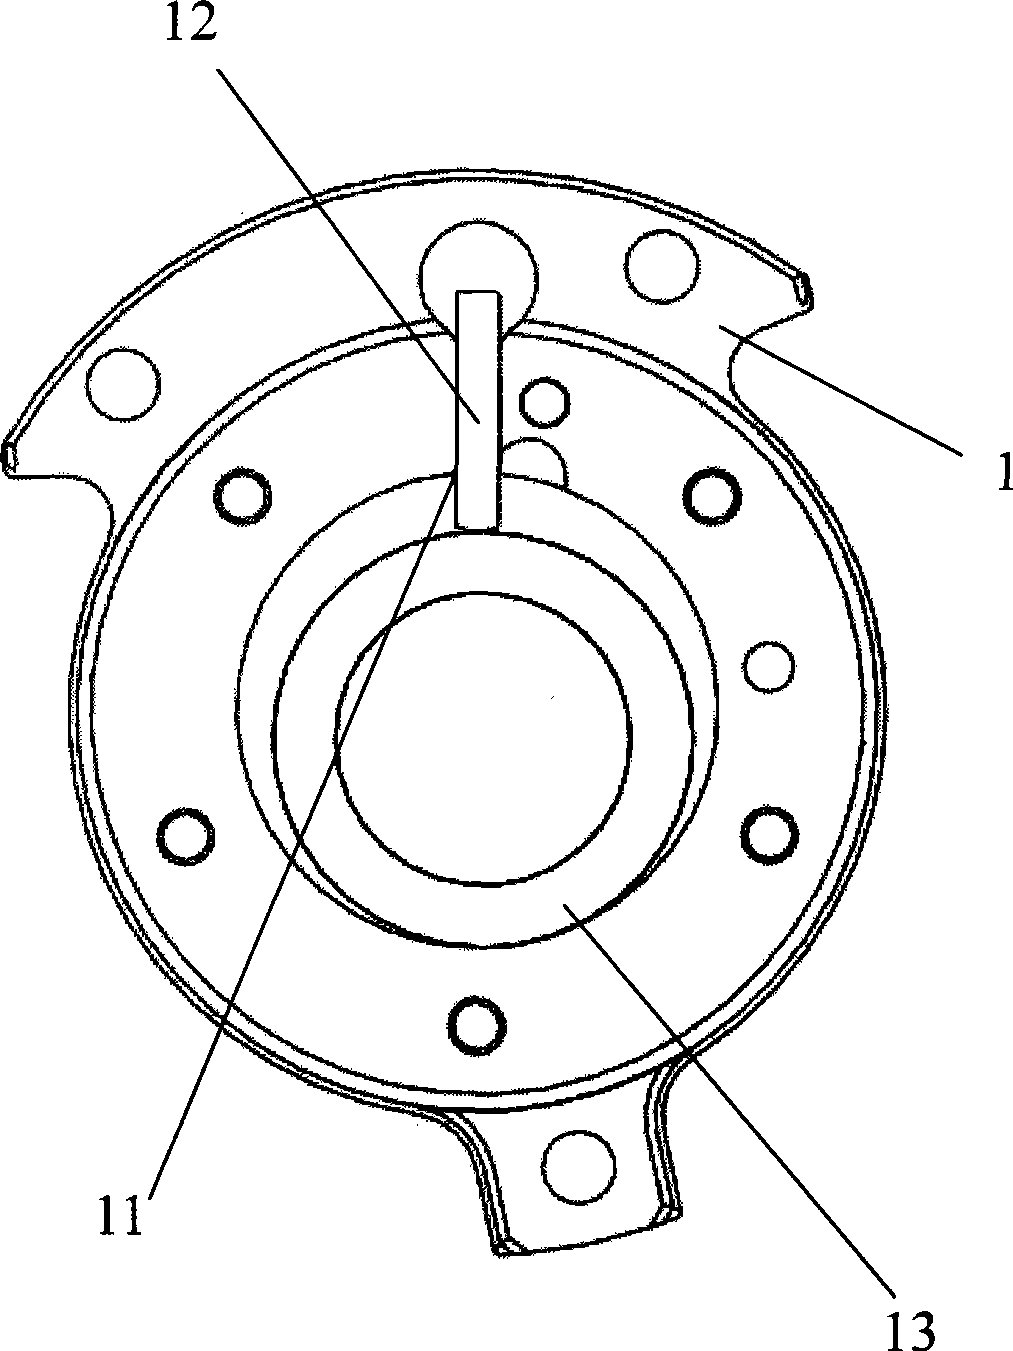 Lubrication sealing structure of rotary compressor gas cylinder